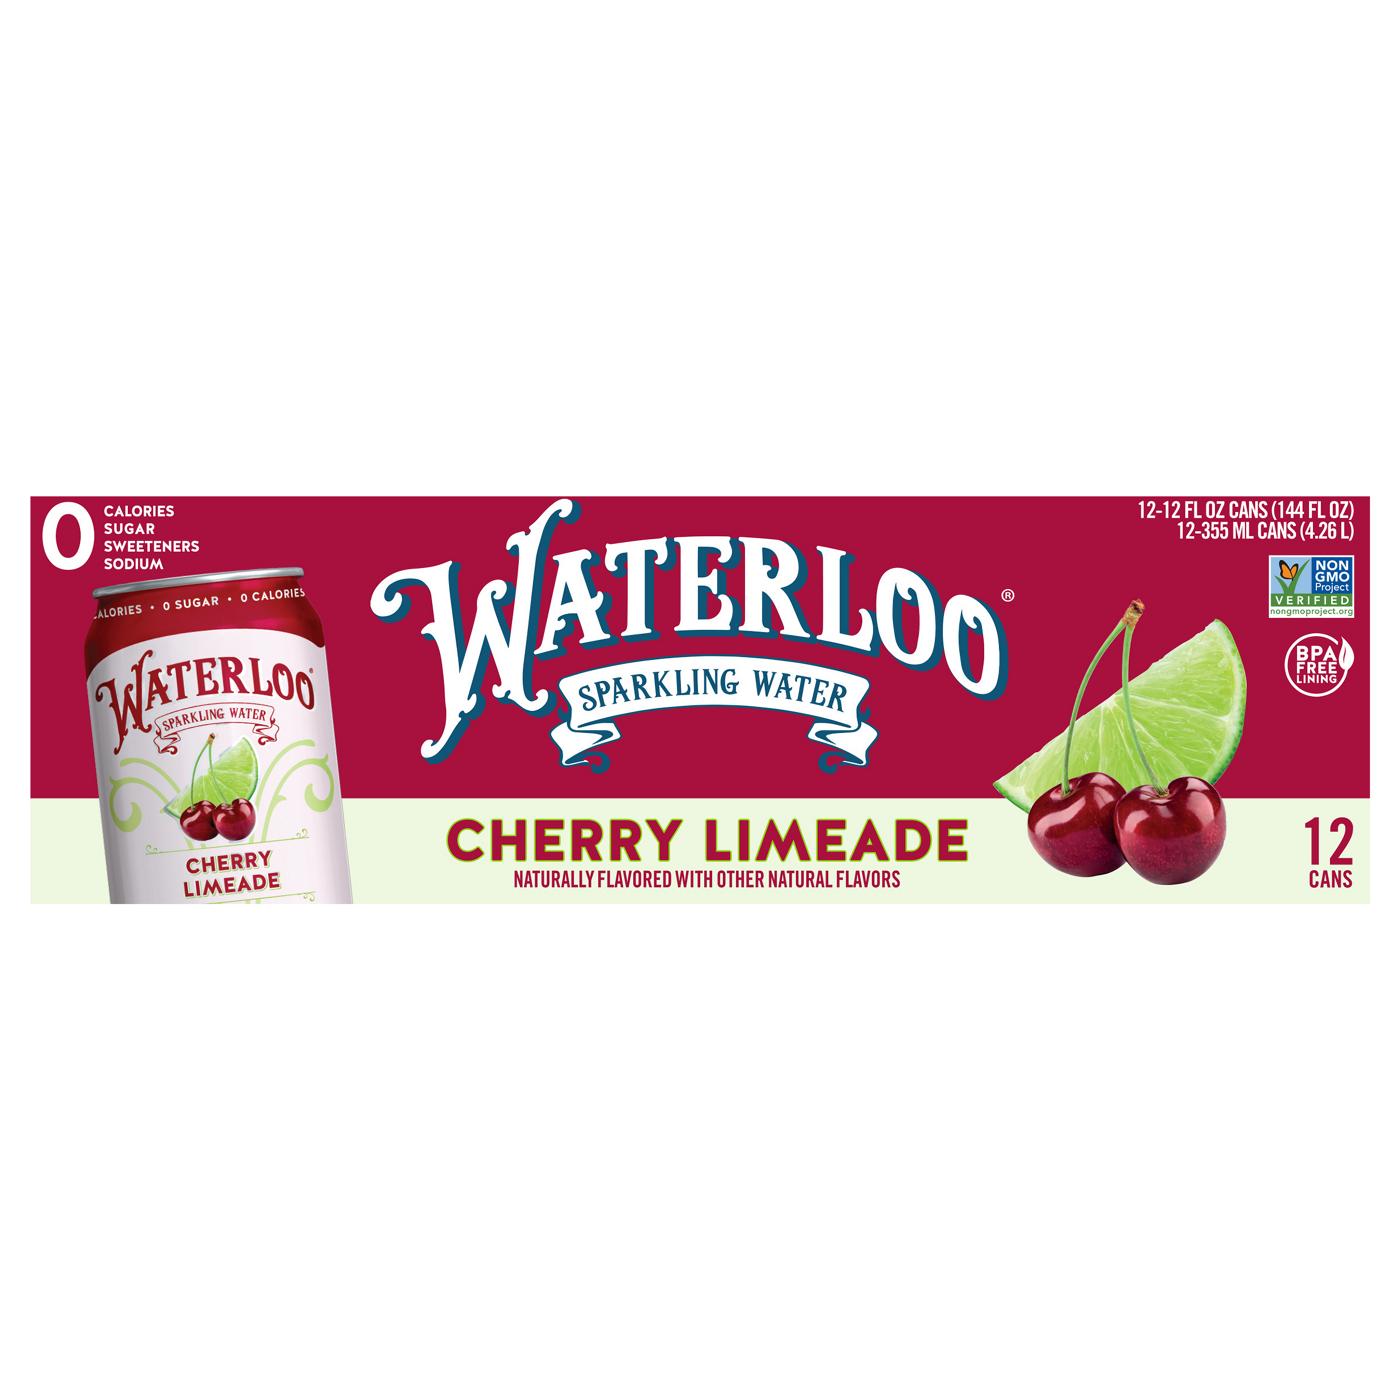 Waterloo Cherry Limeade Sparkling Water 12 pk Cans; image 1 of 2